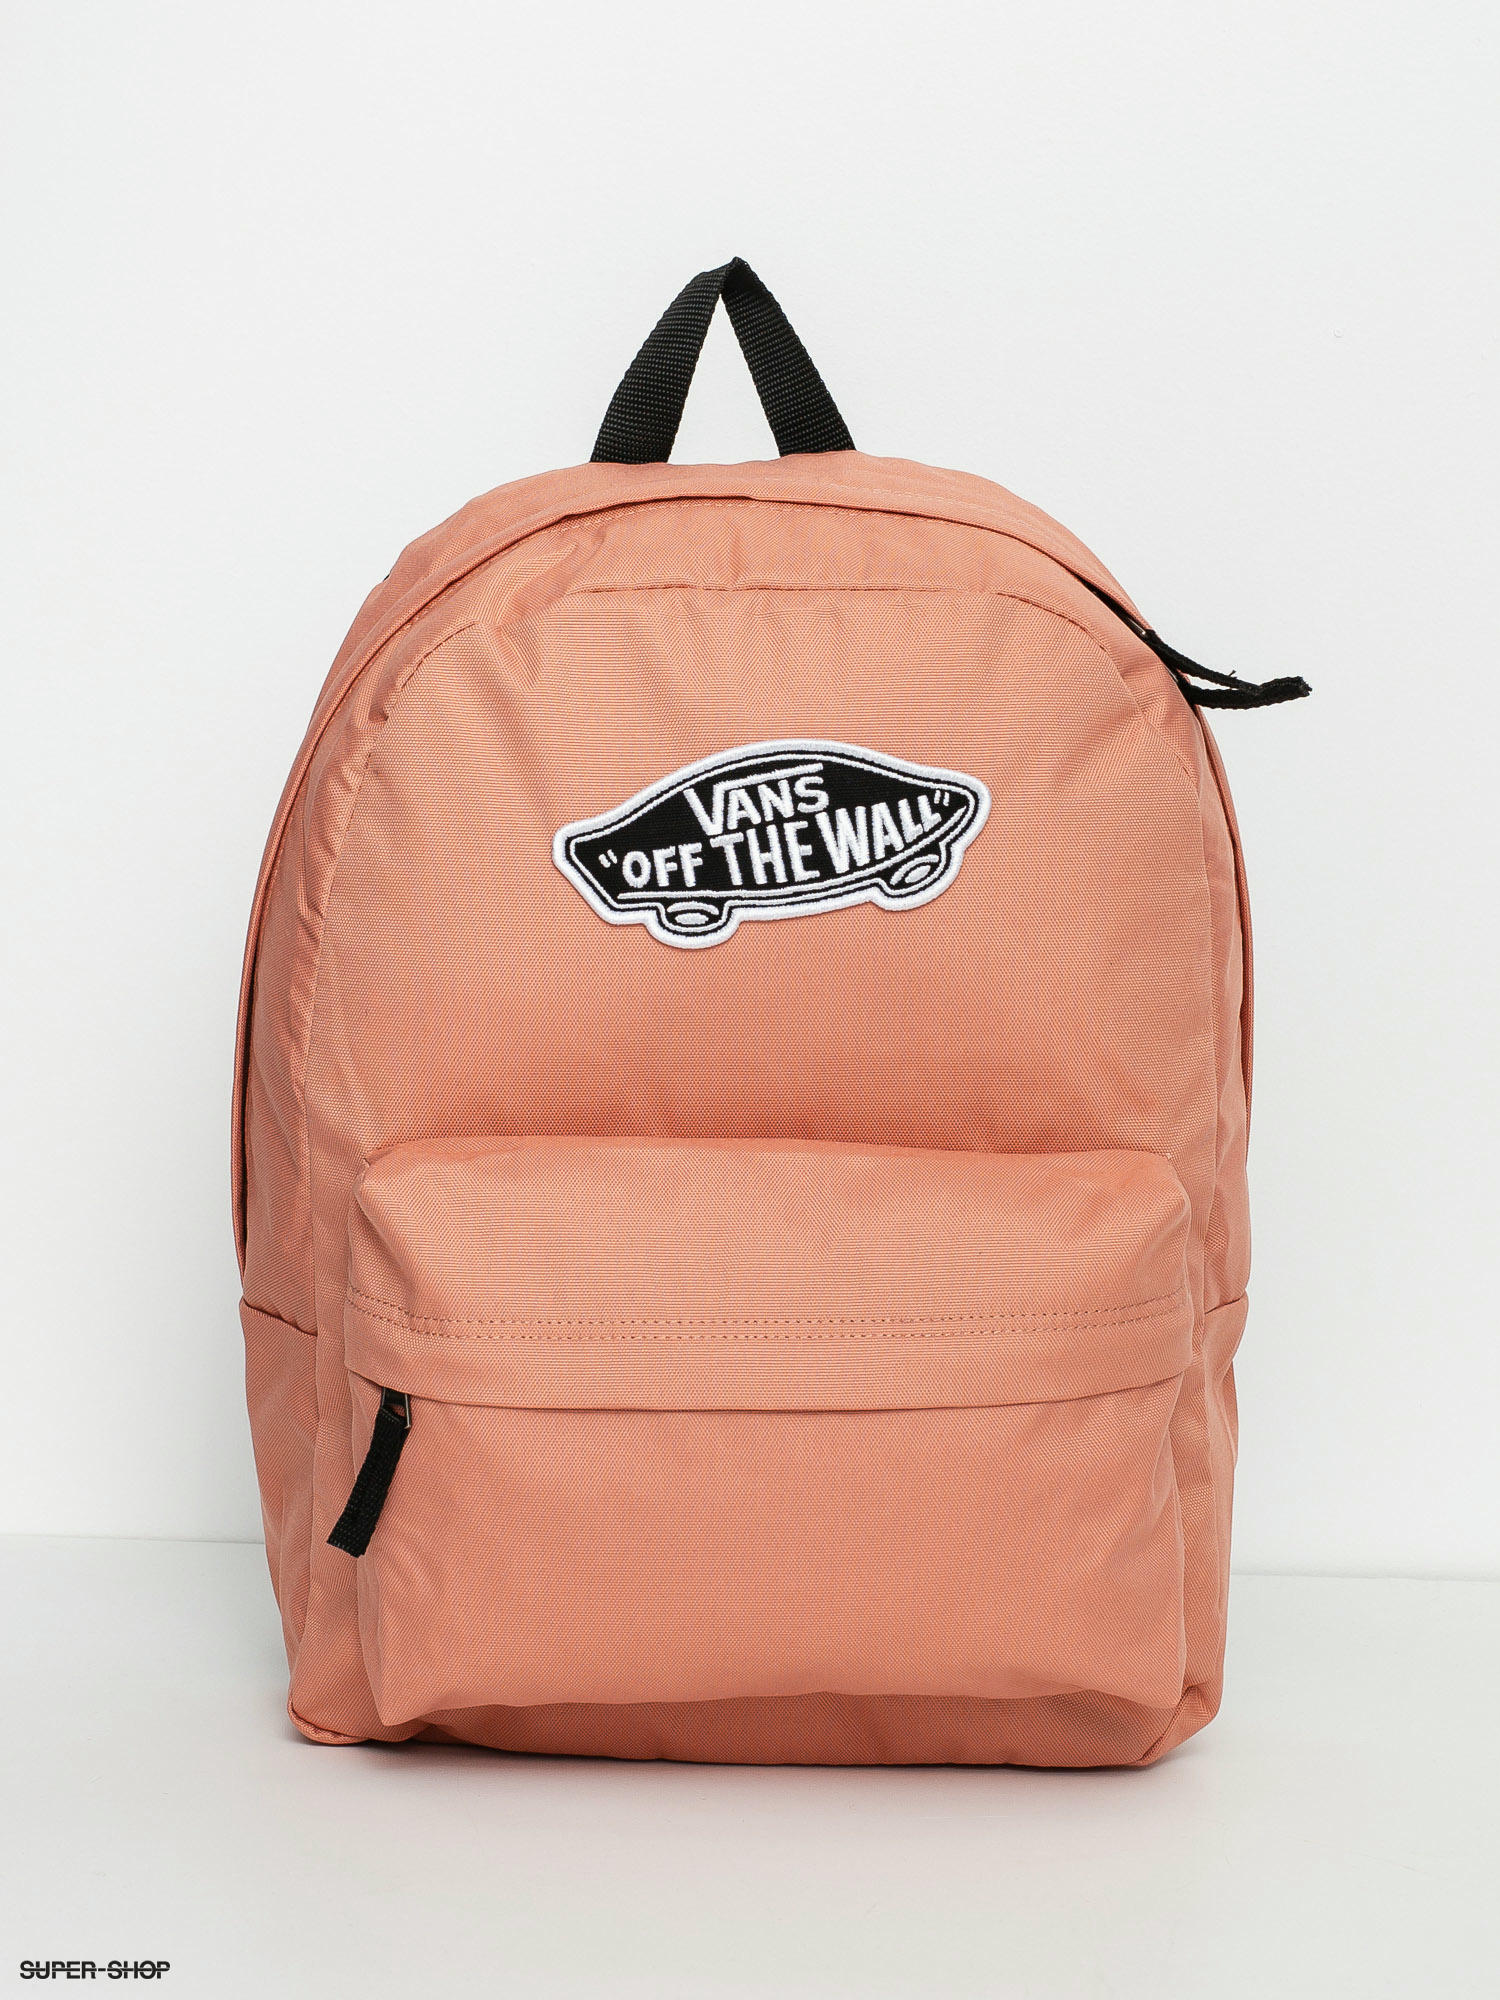 vans off the wall rose backpack